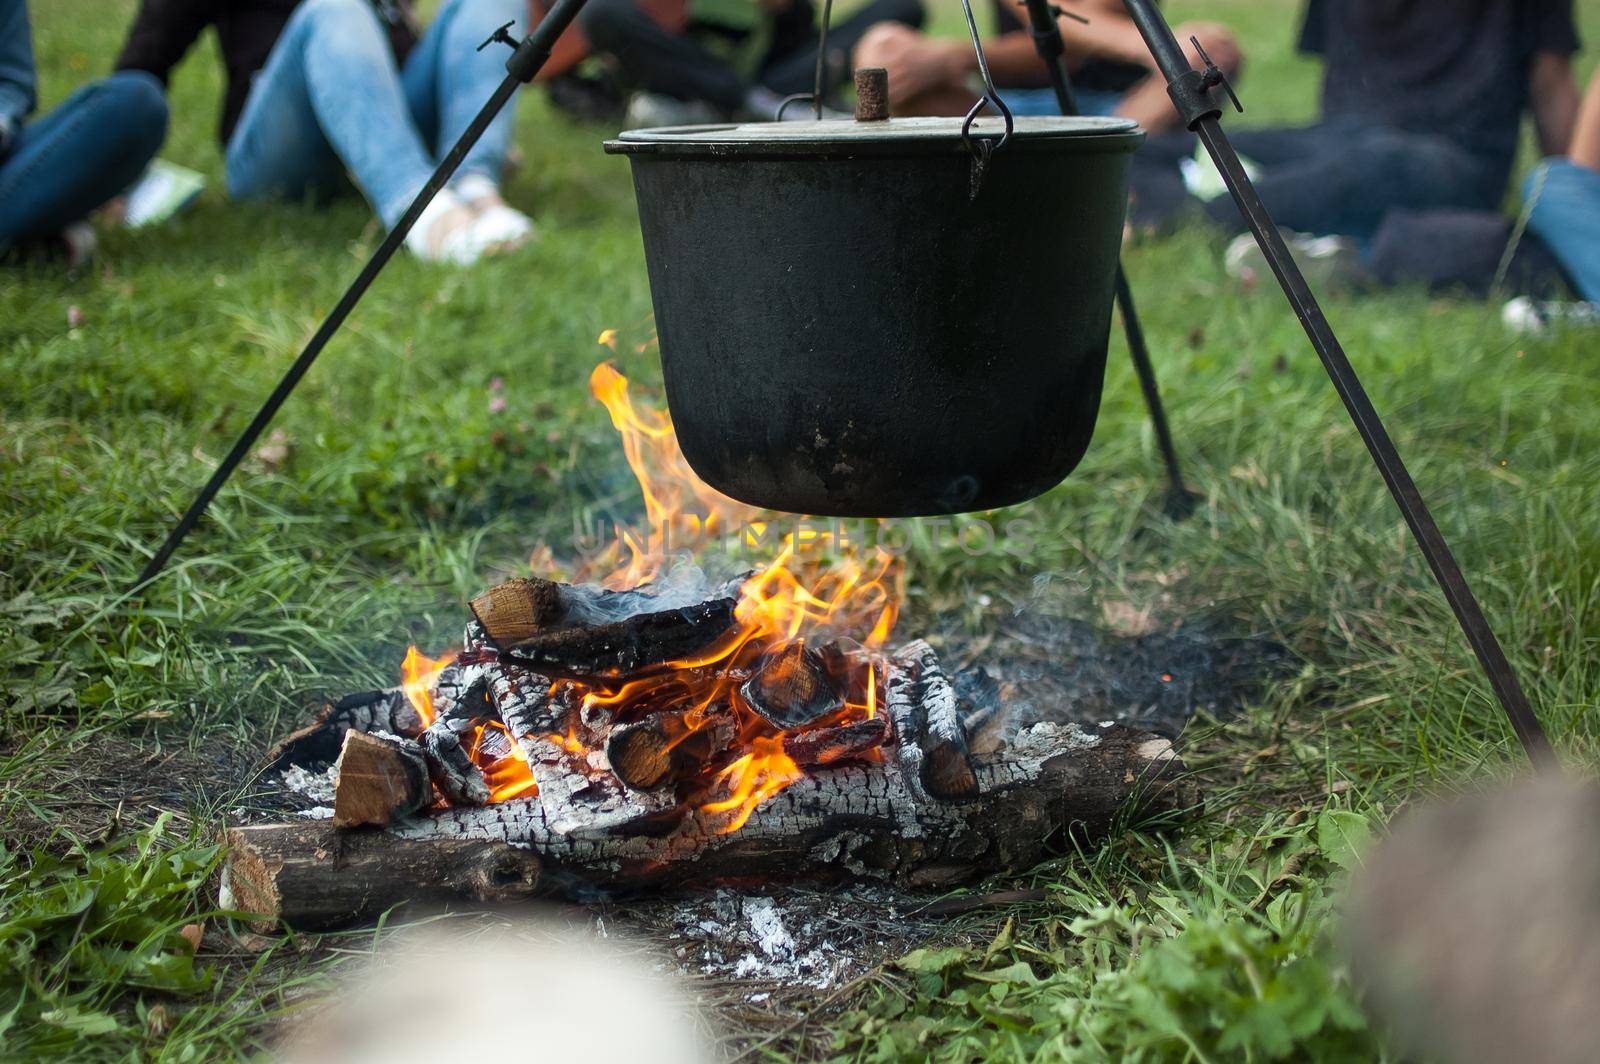 Dark big pot or cauldron, cooking pan with boiling water inside above the fire somewhere in the park or mountains, camping concept.